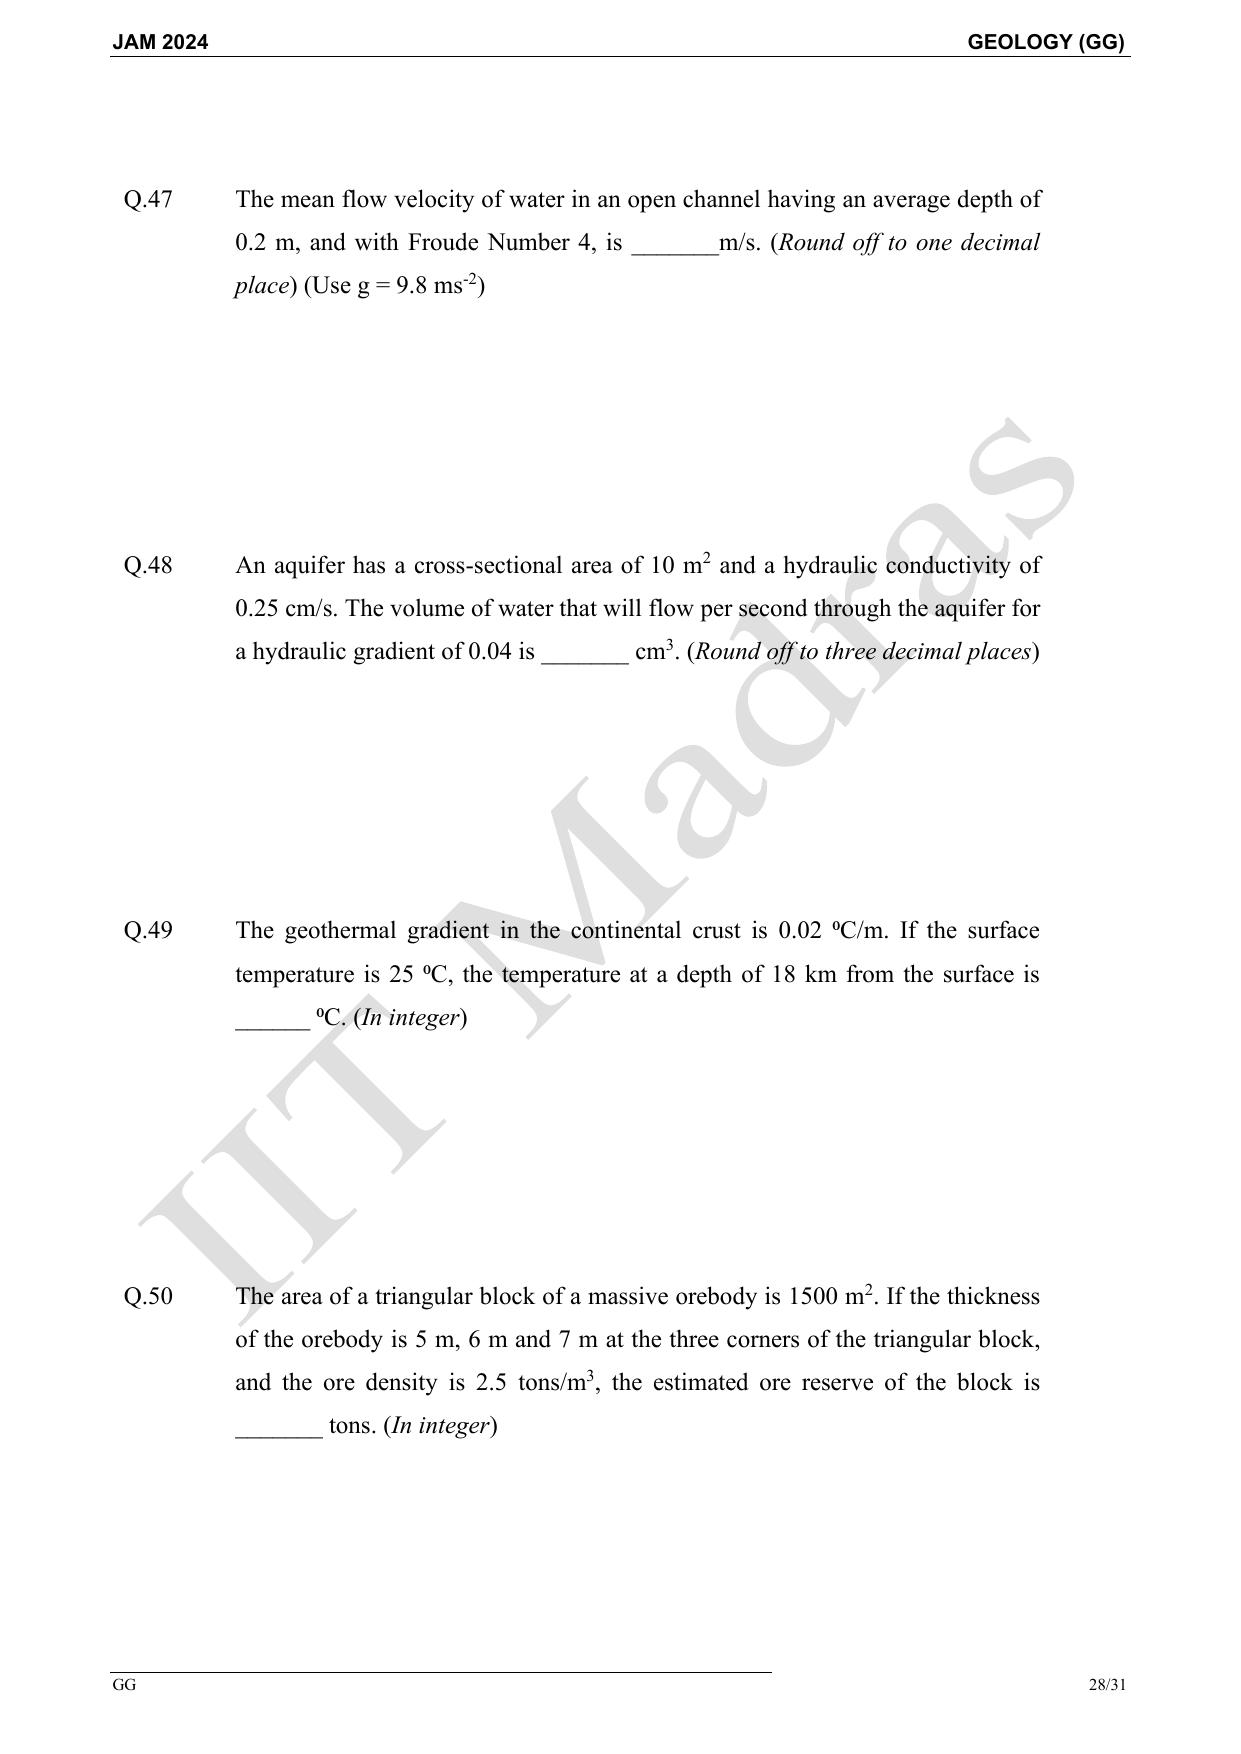 IIT JAM 2024 Geology (GG) Master Question Paper - Page 28